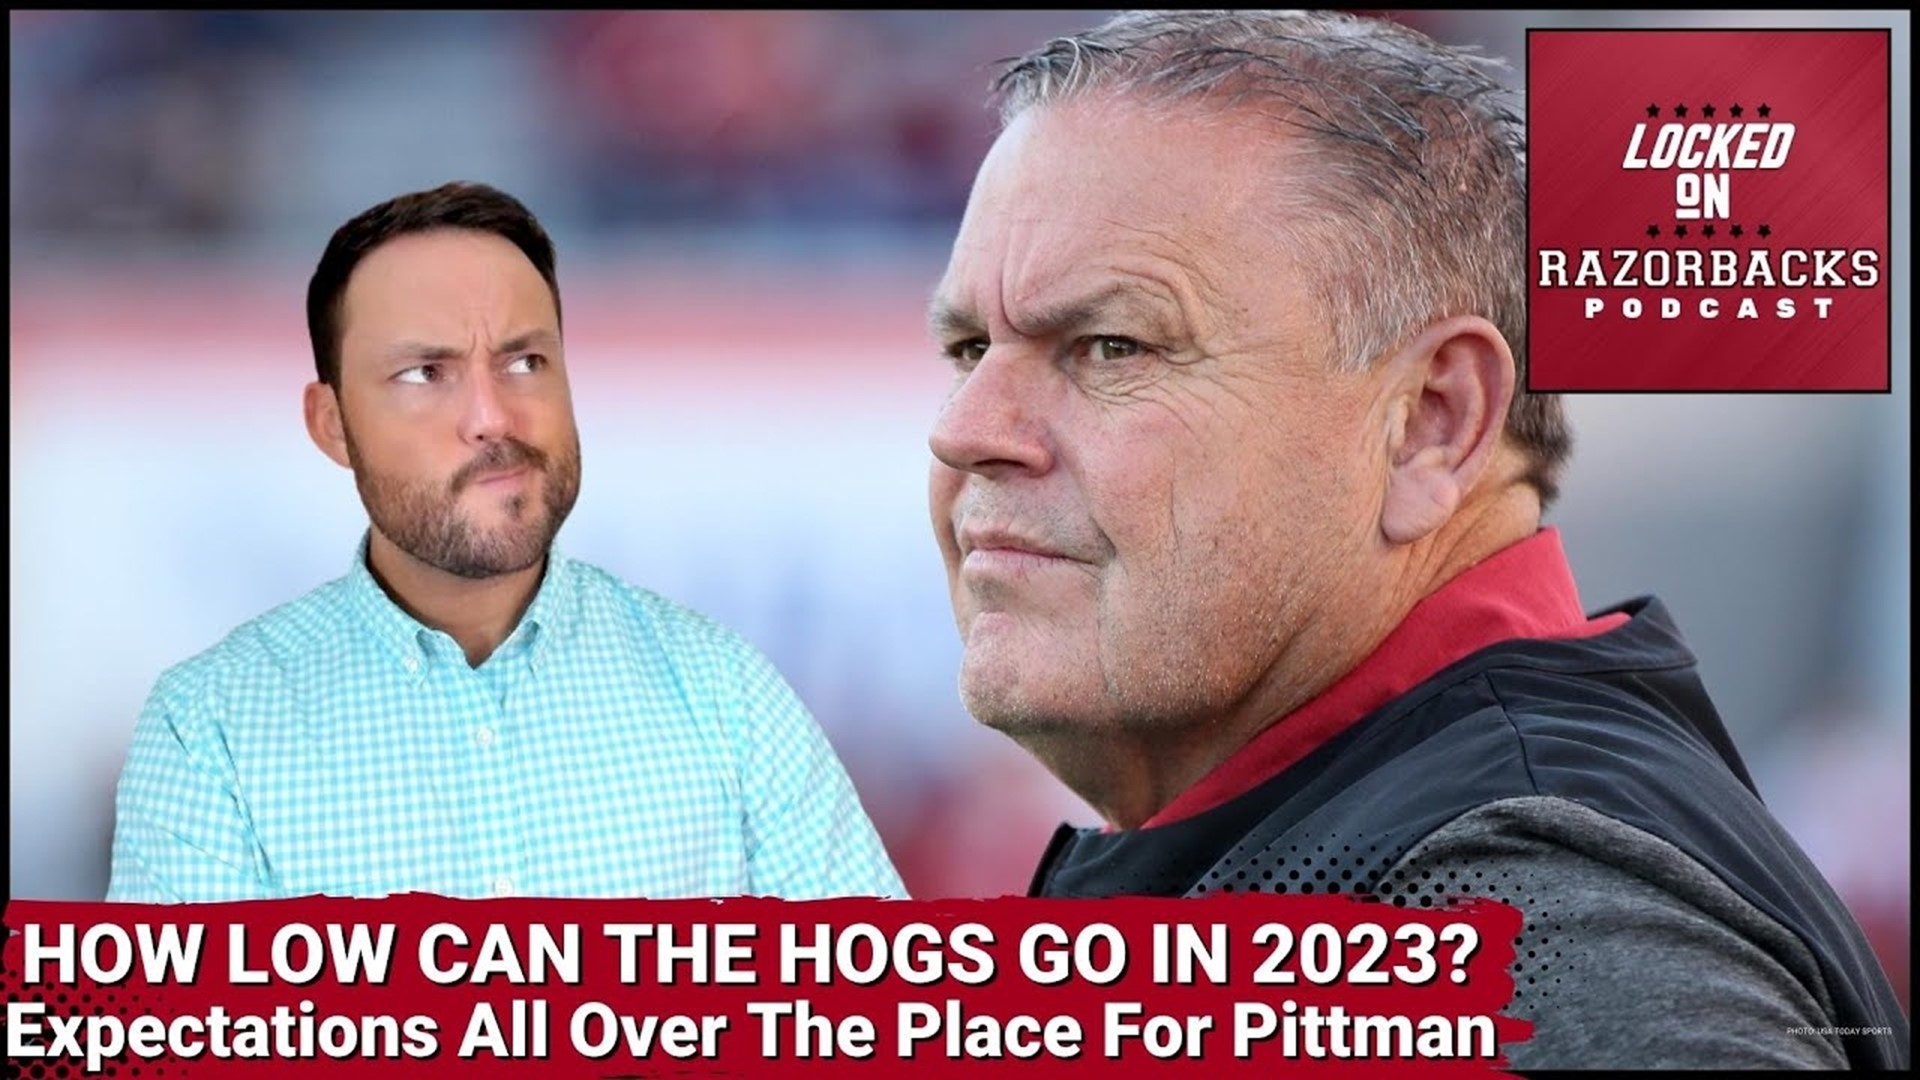 Arkansas fans have expectations all over the place when it comes to what will satisfy them in the 2023 football season.